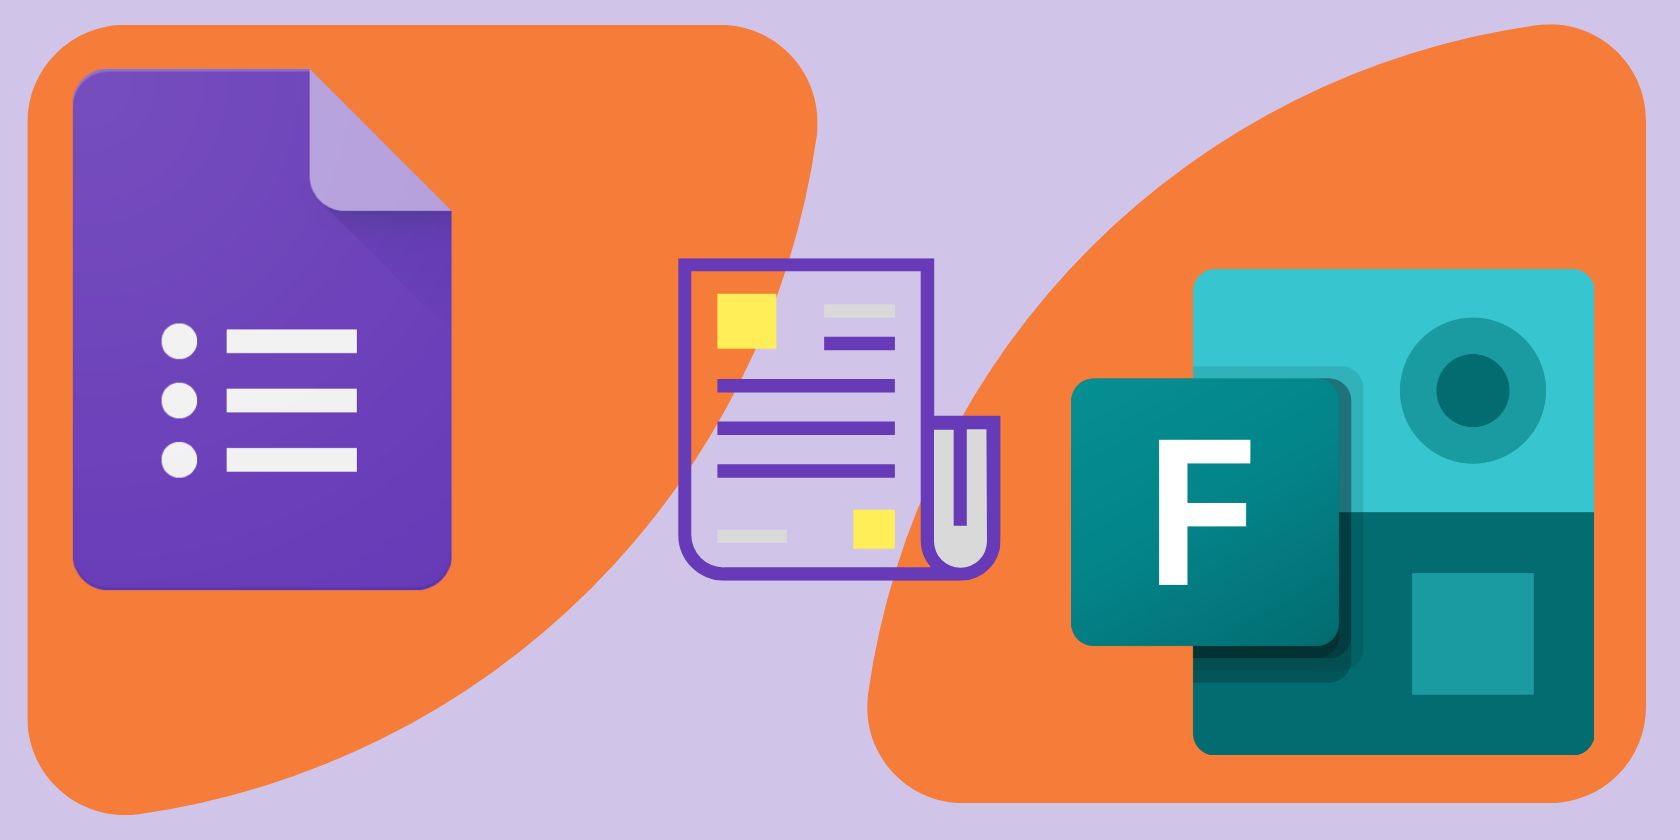 An illustration of Google Forms and Microsoft Forms comparison